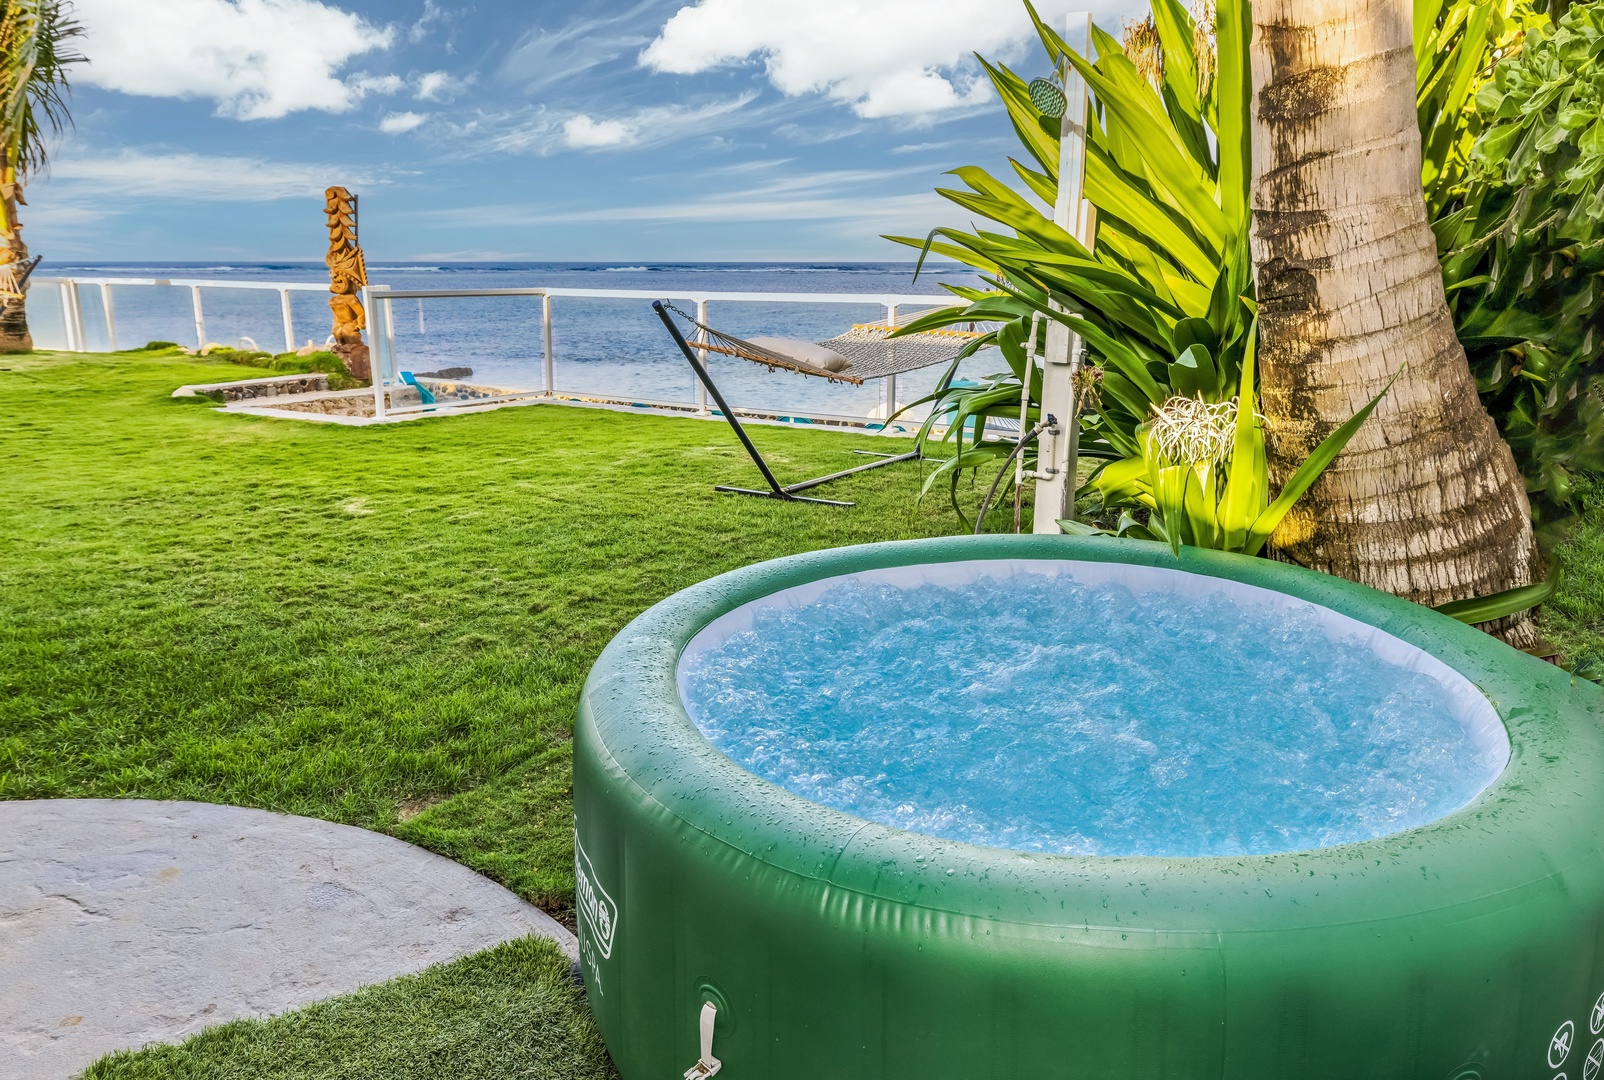 Hauula Vacation Rentals, Paradise Reef Retreat - Outdoor fun at the jacuzzi